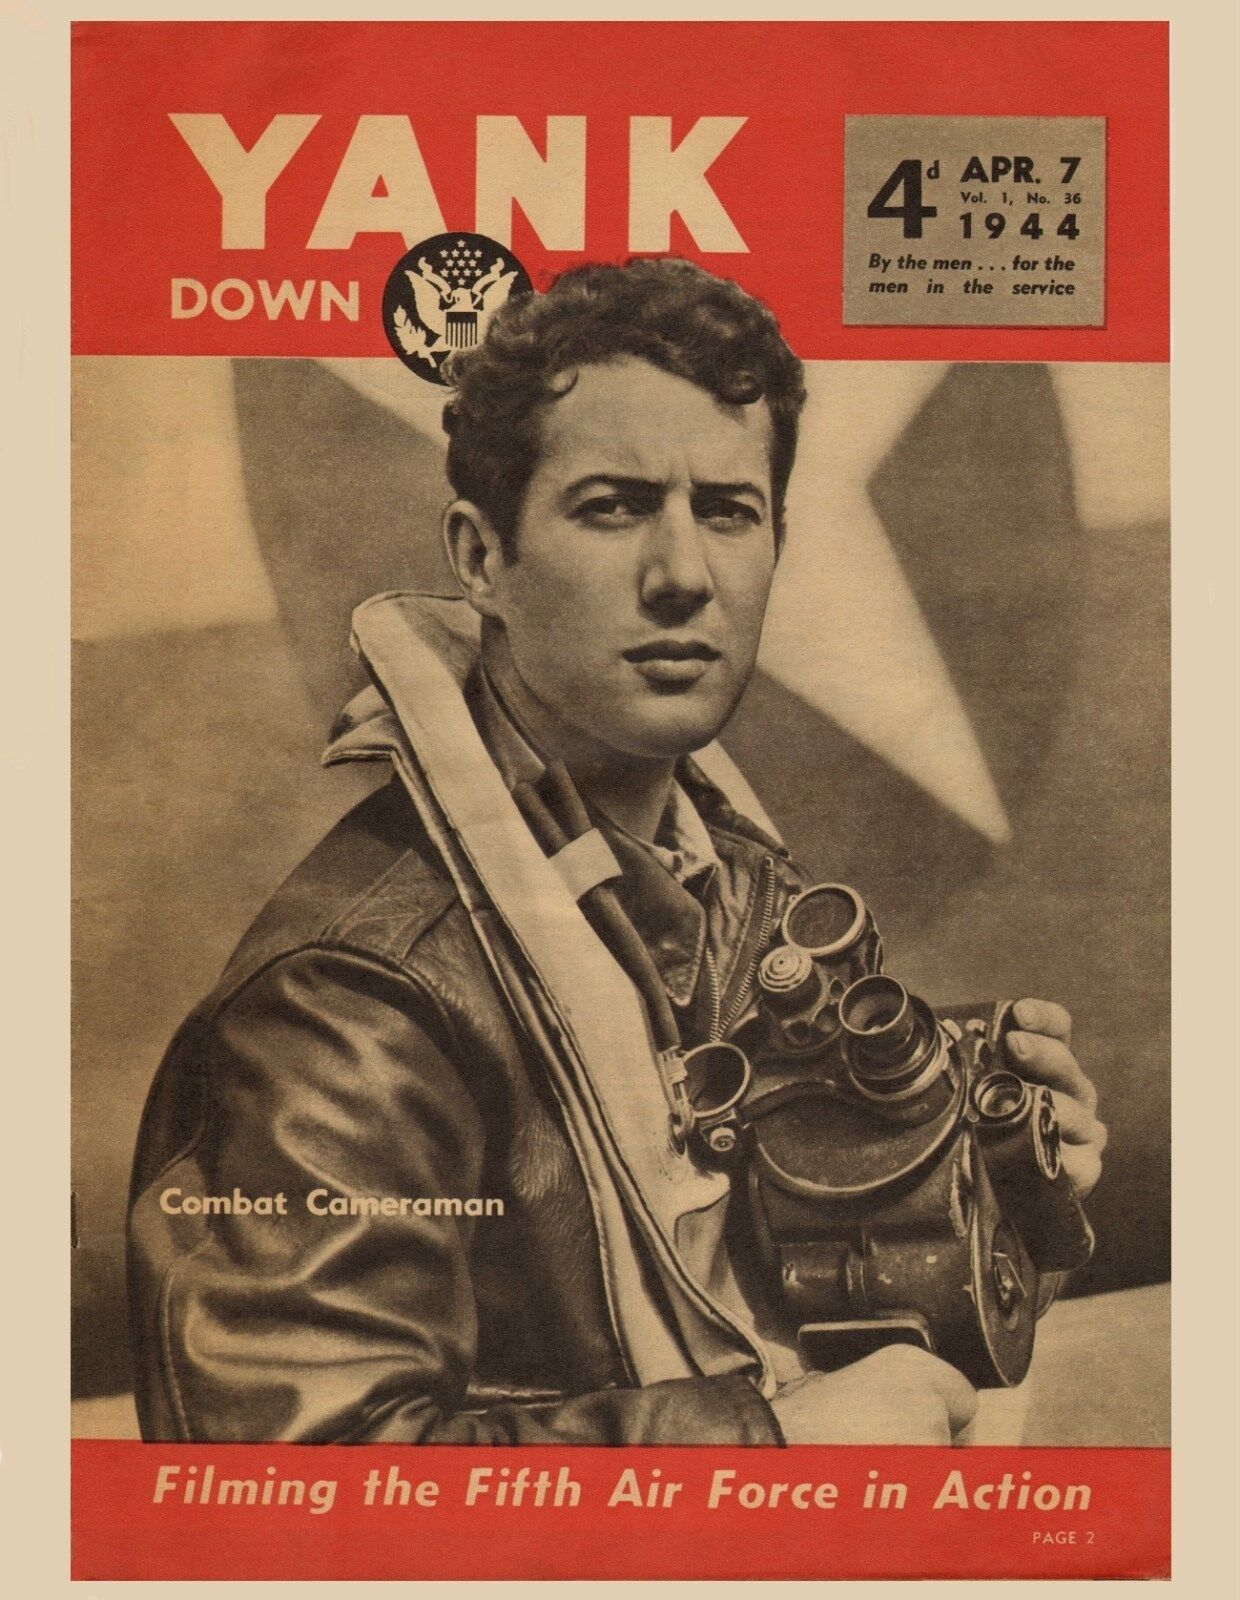 5 New Same Postcards, WWII YANK - Combat Cameraman with the Fifth AAF SWPA